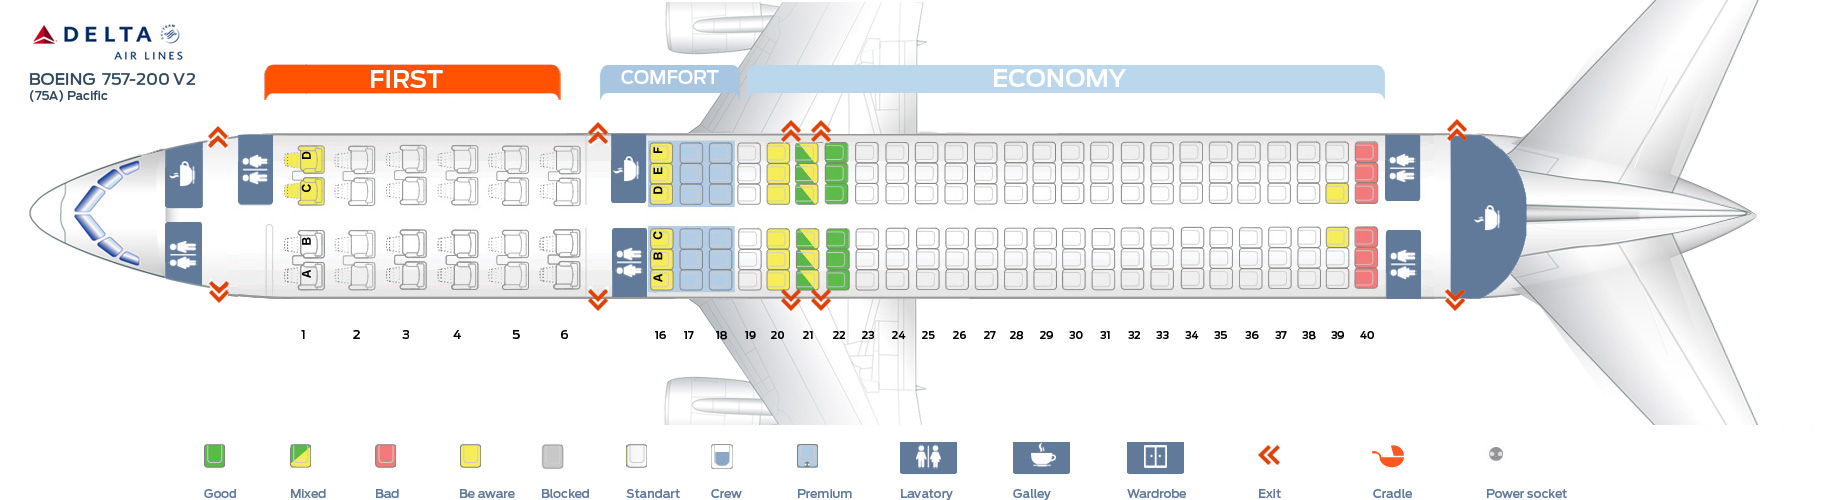 Delta Airlines Boeing 757 200 Seating Chart